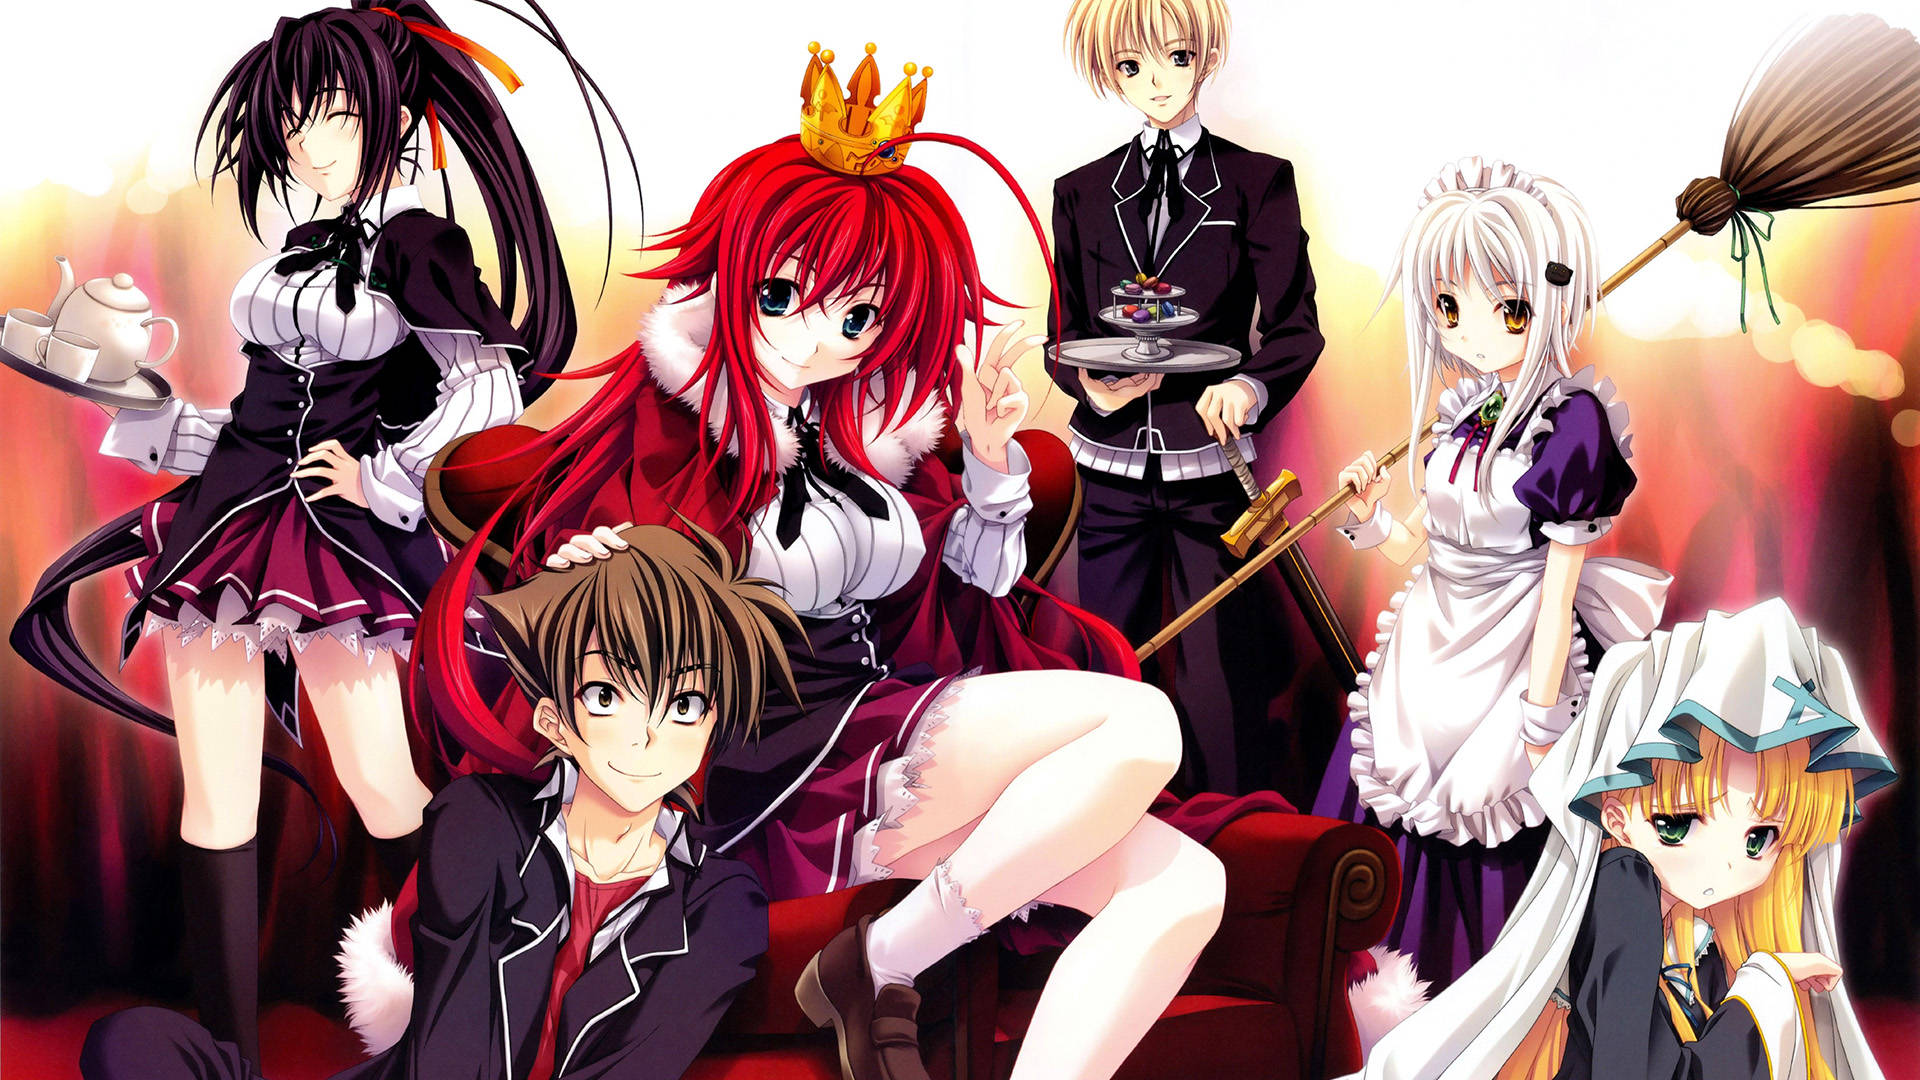 Rias Gremory Defends Her Chess Pieces in Highschool Dxd Wallpaper